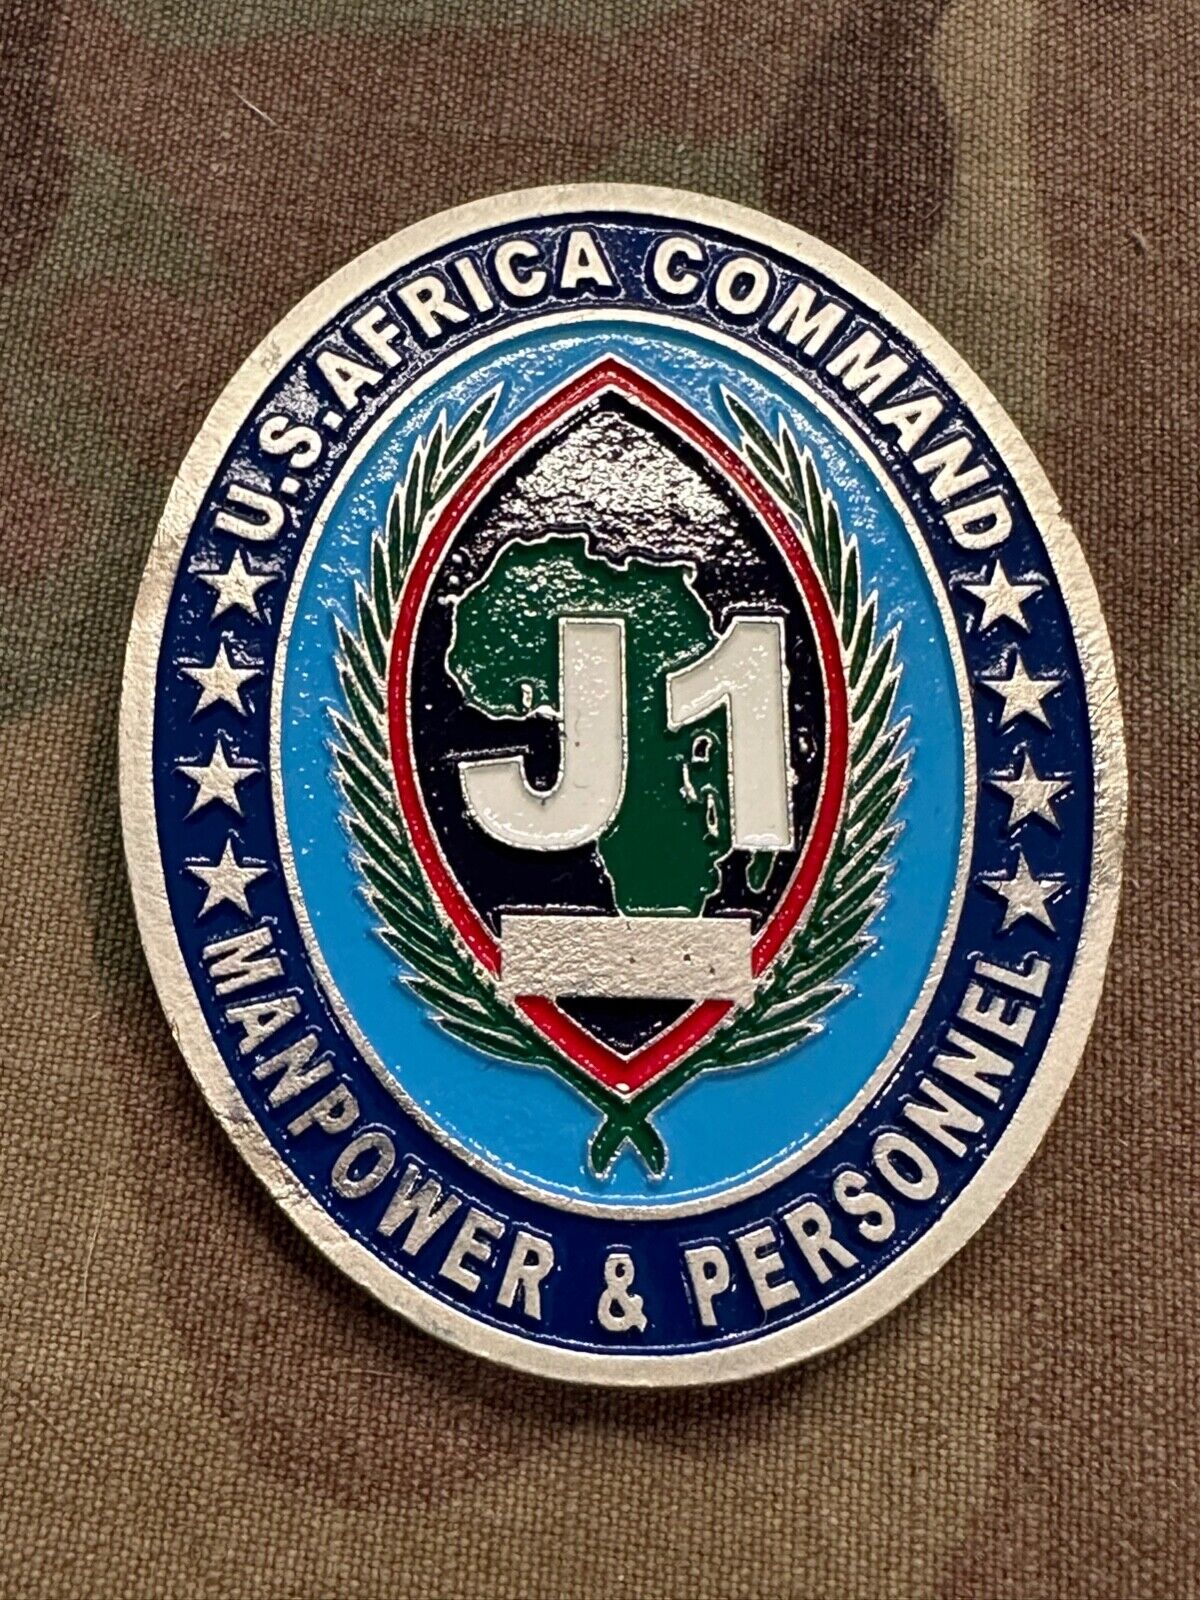 US AFRICA COMMAND (AFRICOM) J1 Manpower & Personnel 2018 Joint Challenge Coin